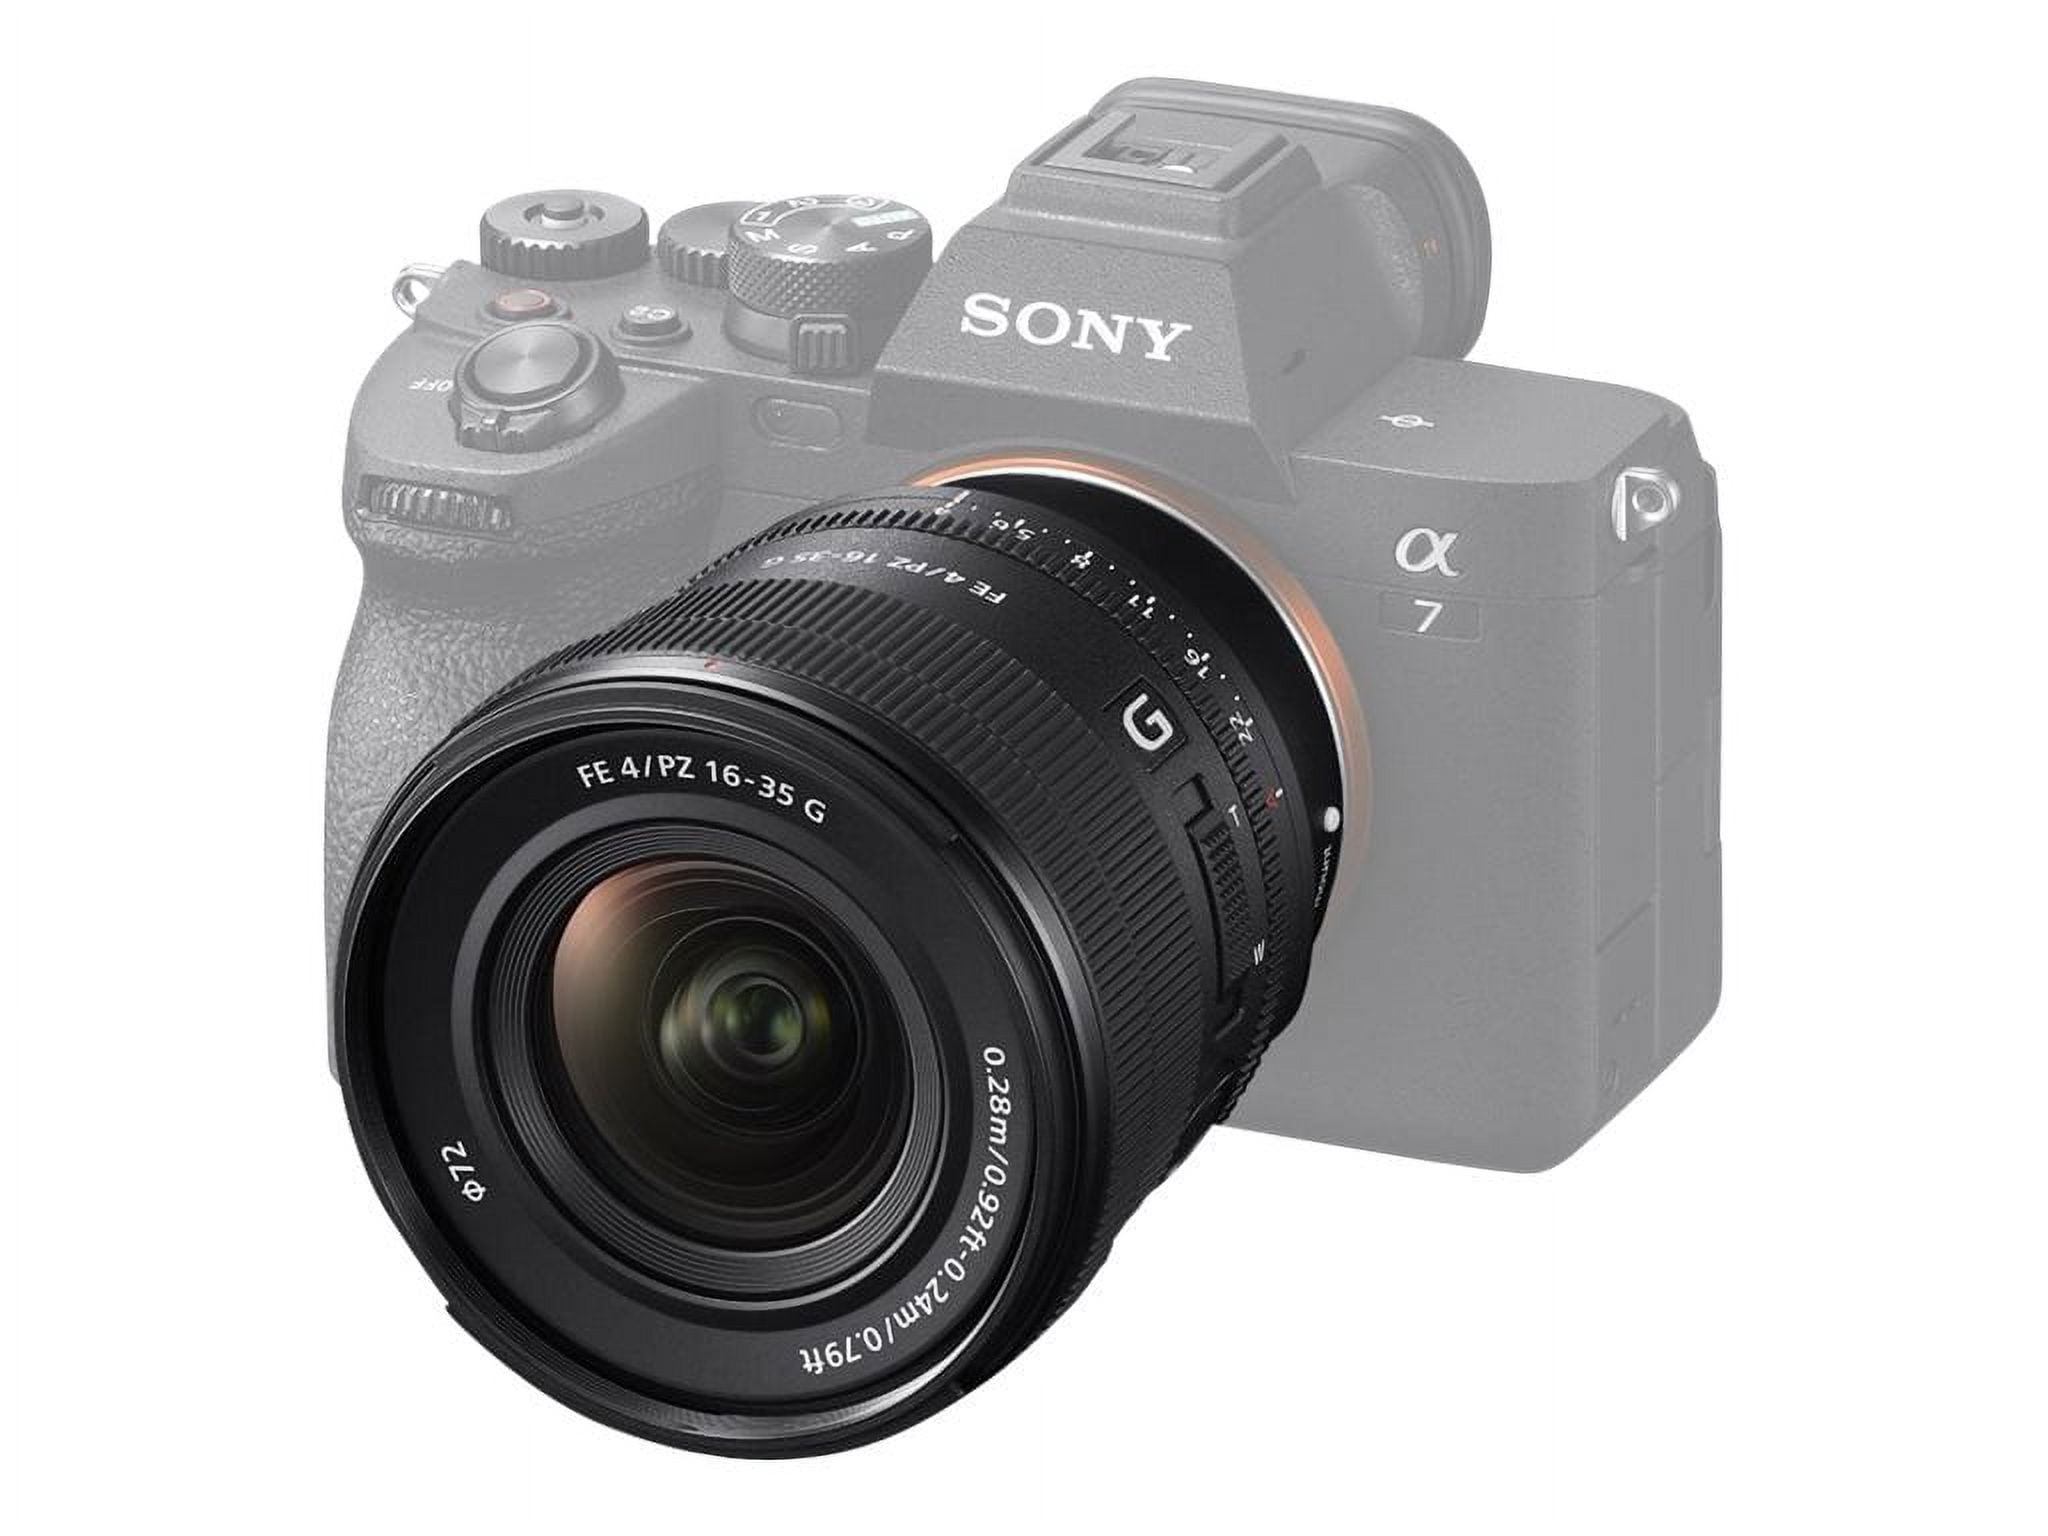 Sony FE PZ 16-35mm F4 G - Full-Frame Constant-Aperture Wide-Angle